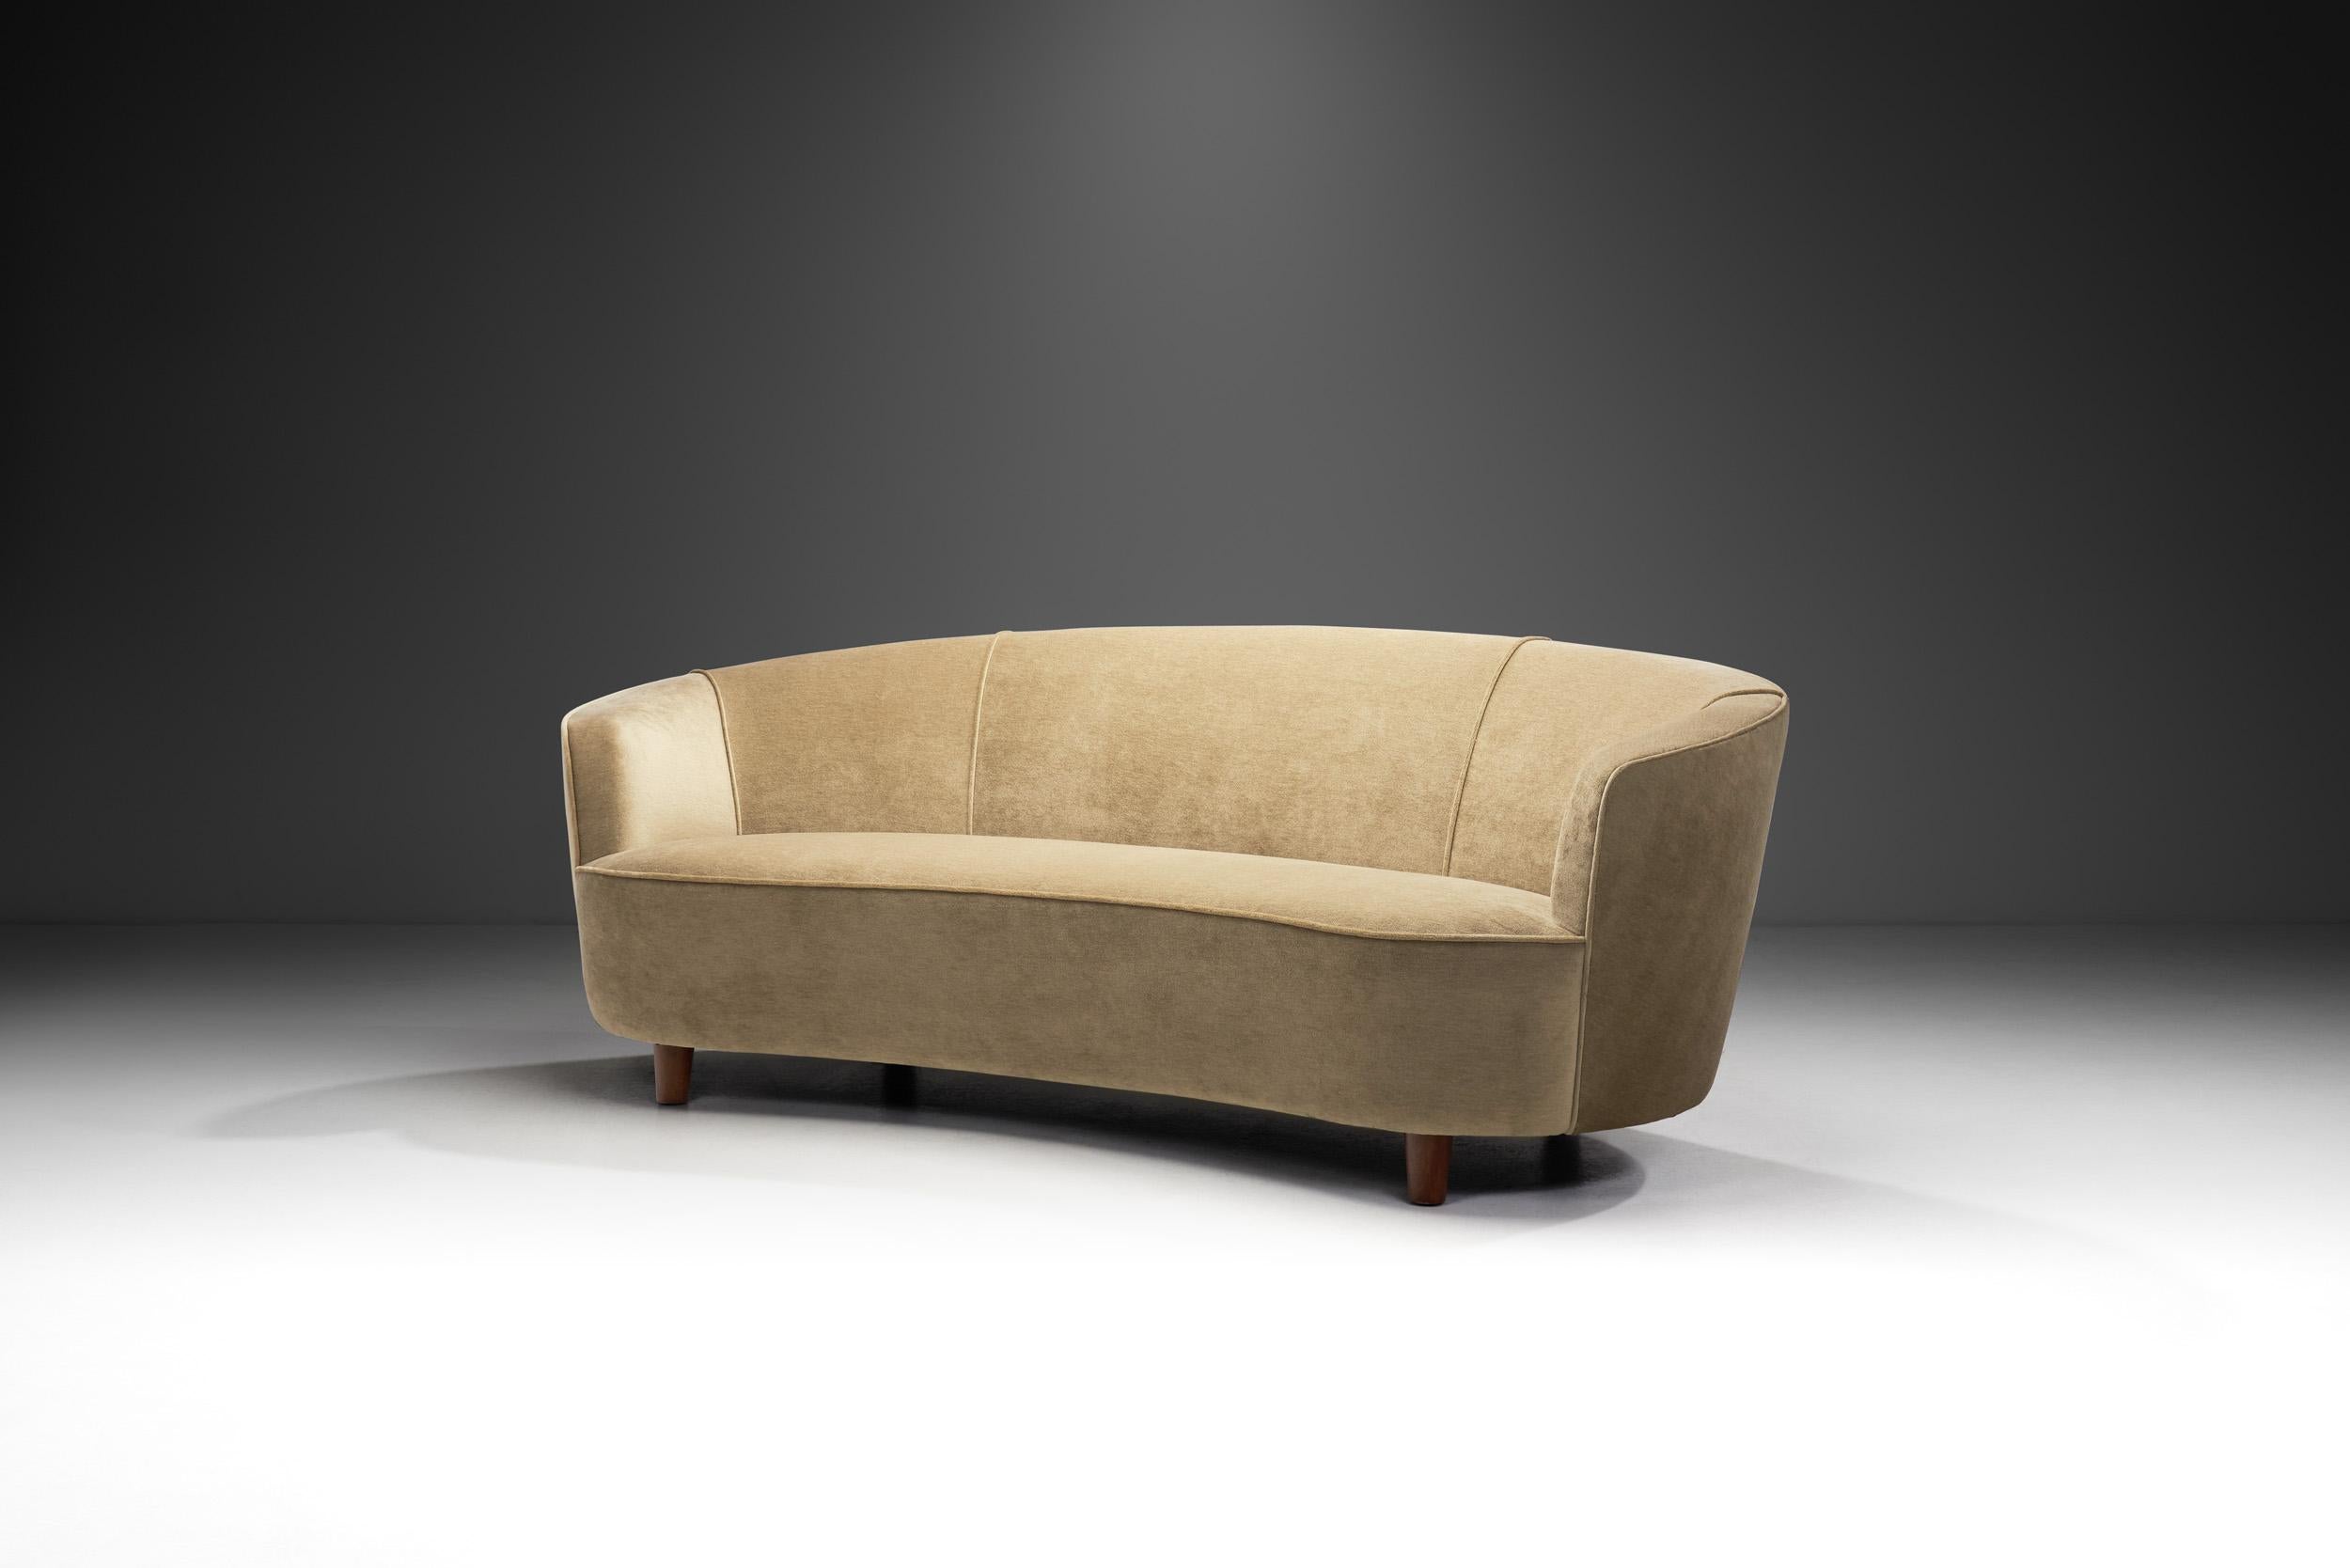 Designed in the early phase of what we know today as mid-century modern, this charming sofa is evidence of how traditional Swedish craftsmanship was brought into modernism. A functional anchor piece is all that is needed to introduce mid-century